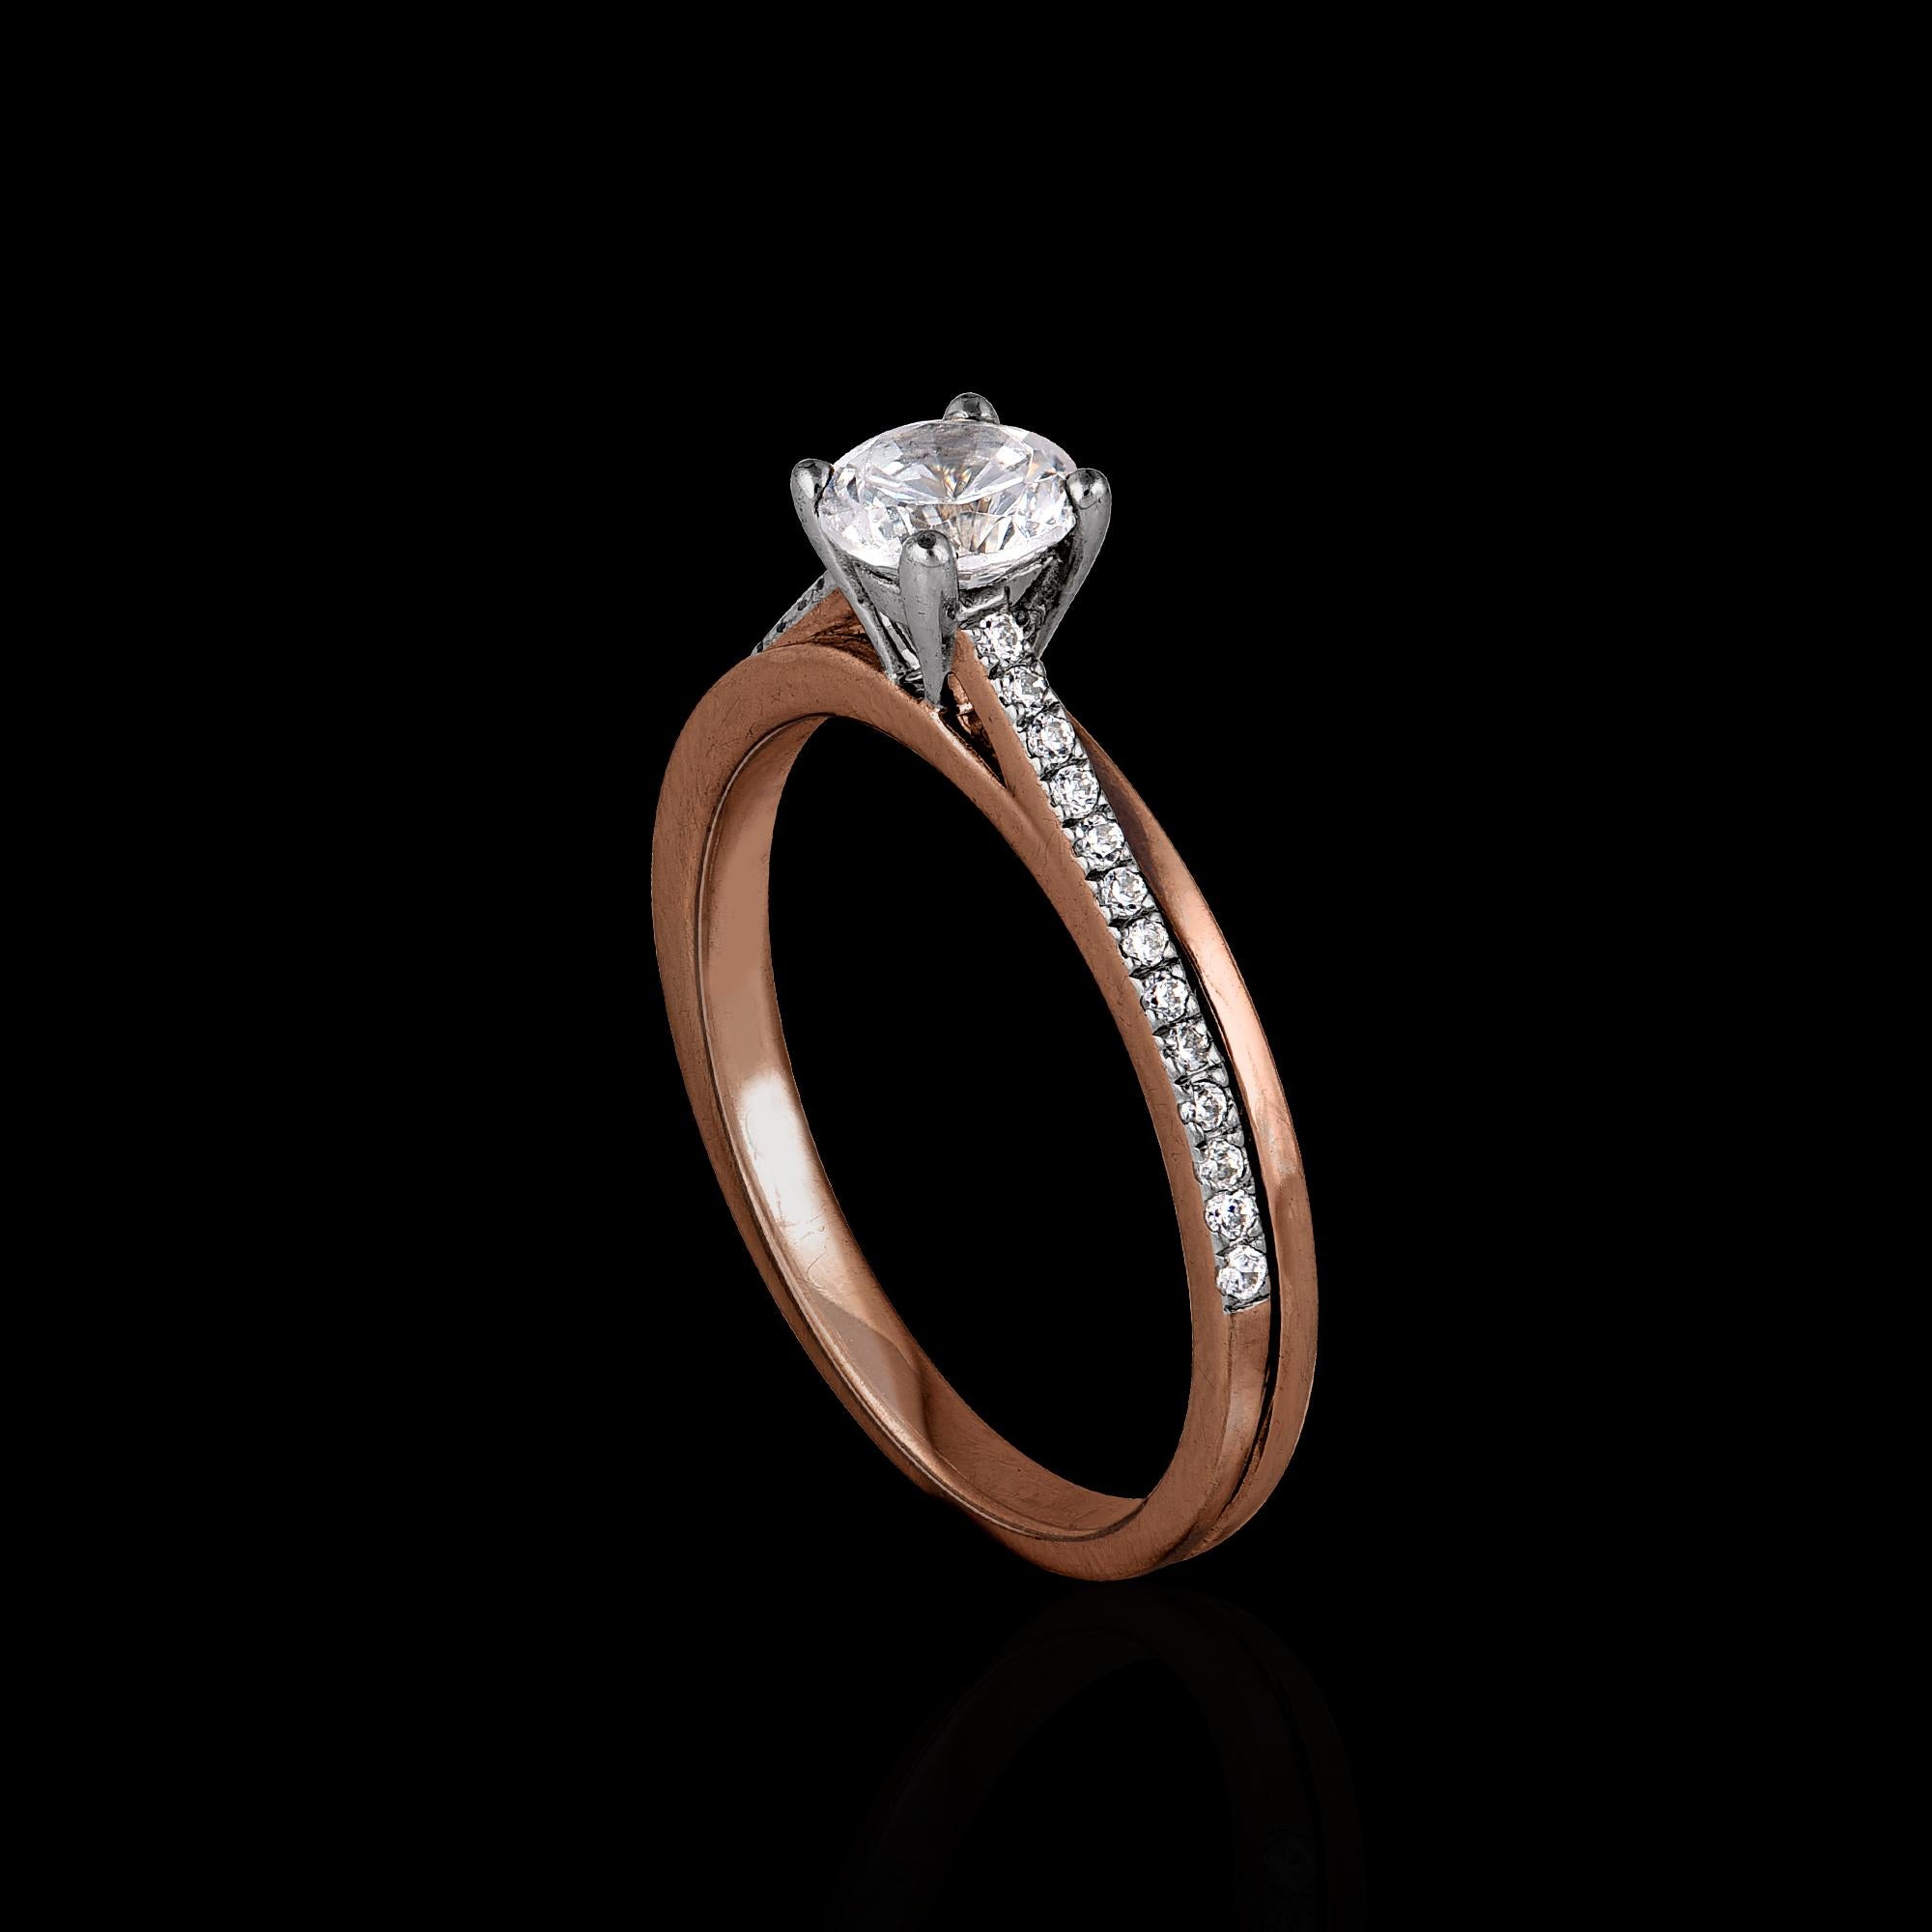 Stunning and classic, this diamond ring is beautifully crafted in 18 karat Solid rose gold. This engagement ring features 0.50 ct of centre stone and 0.12 ct lined with rows of 27 round brilliant-cut sparkling diamonds in secured prong and